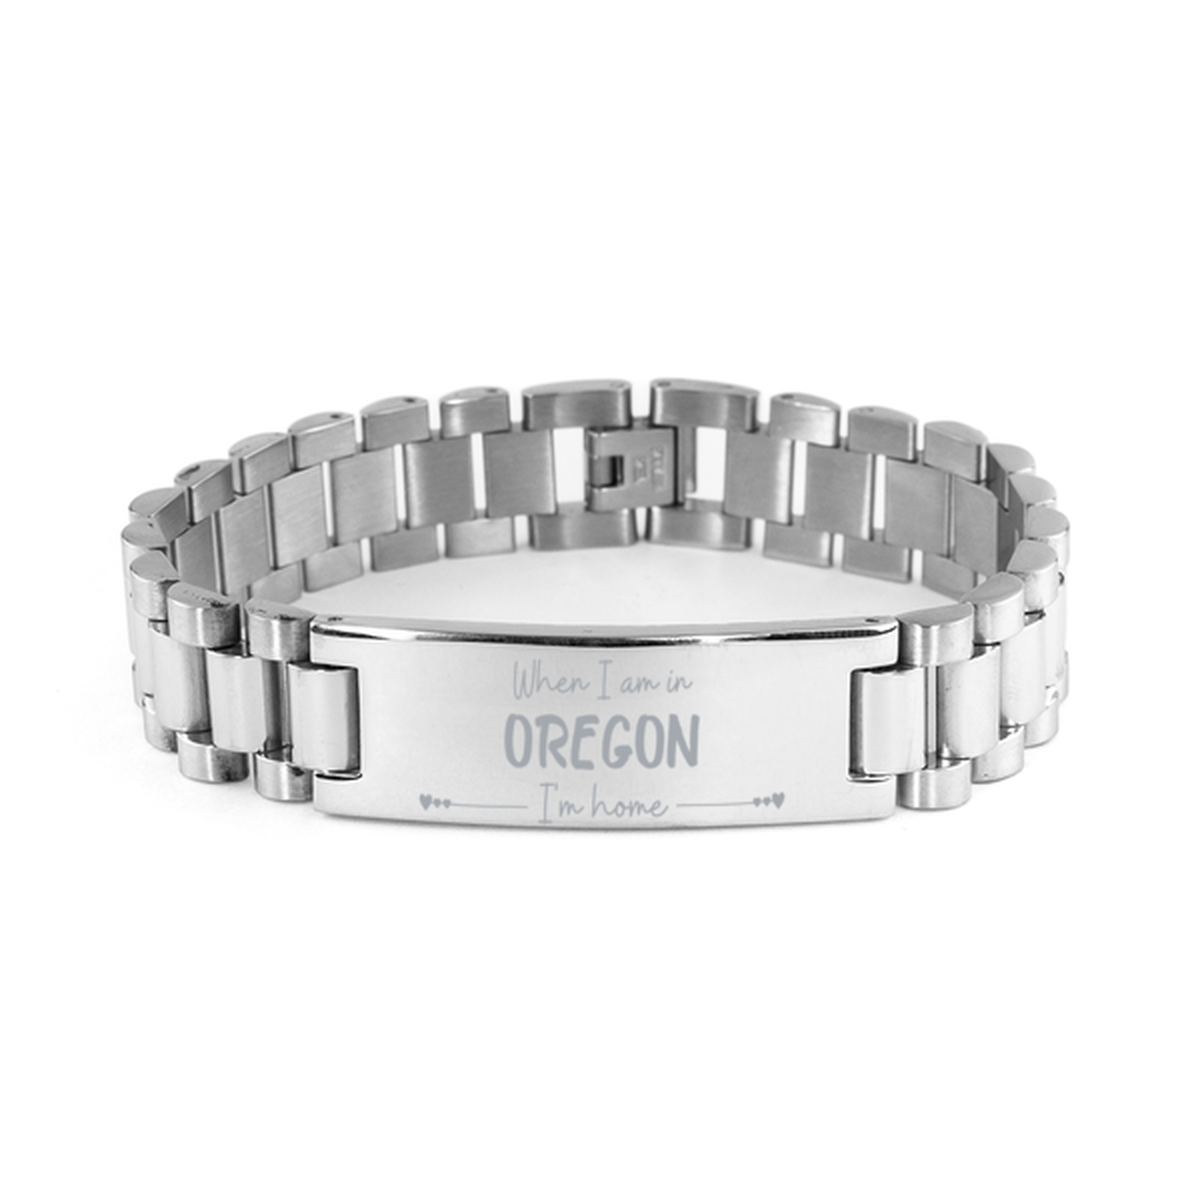 When I am in Oregon I'm home Ladder Stainless Steel Bracelet, Cheap Gifts For Oregon, State Oregon Birthday Gifts for Friends Coworker